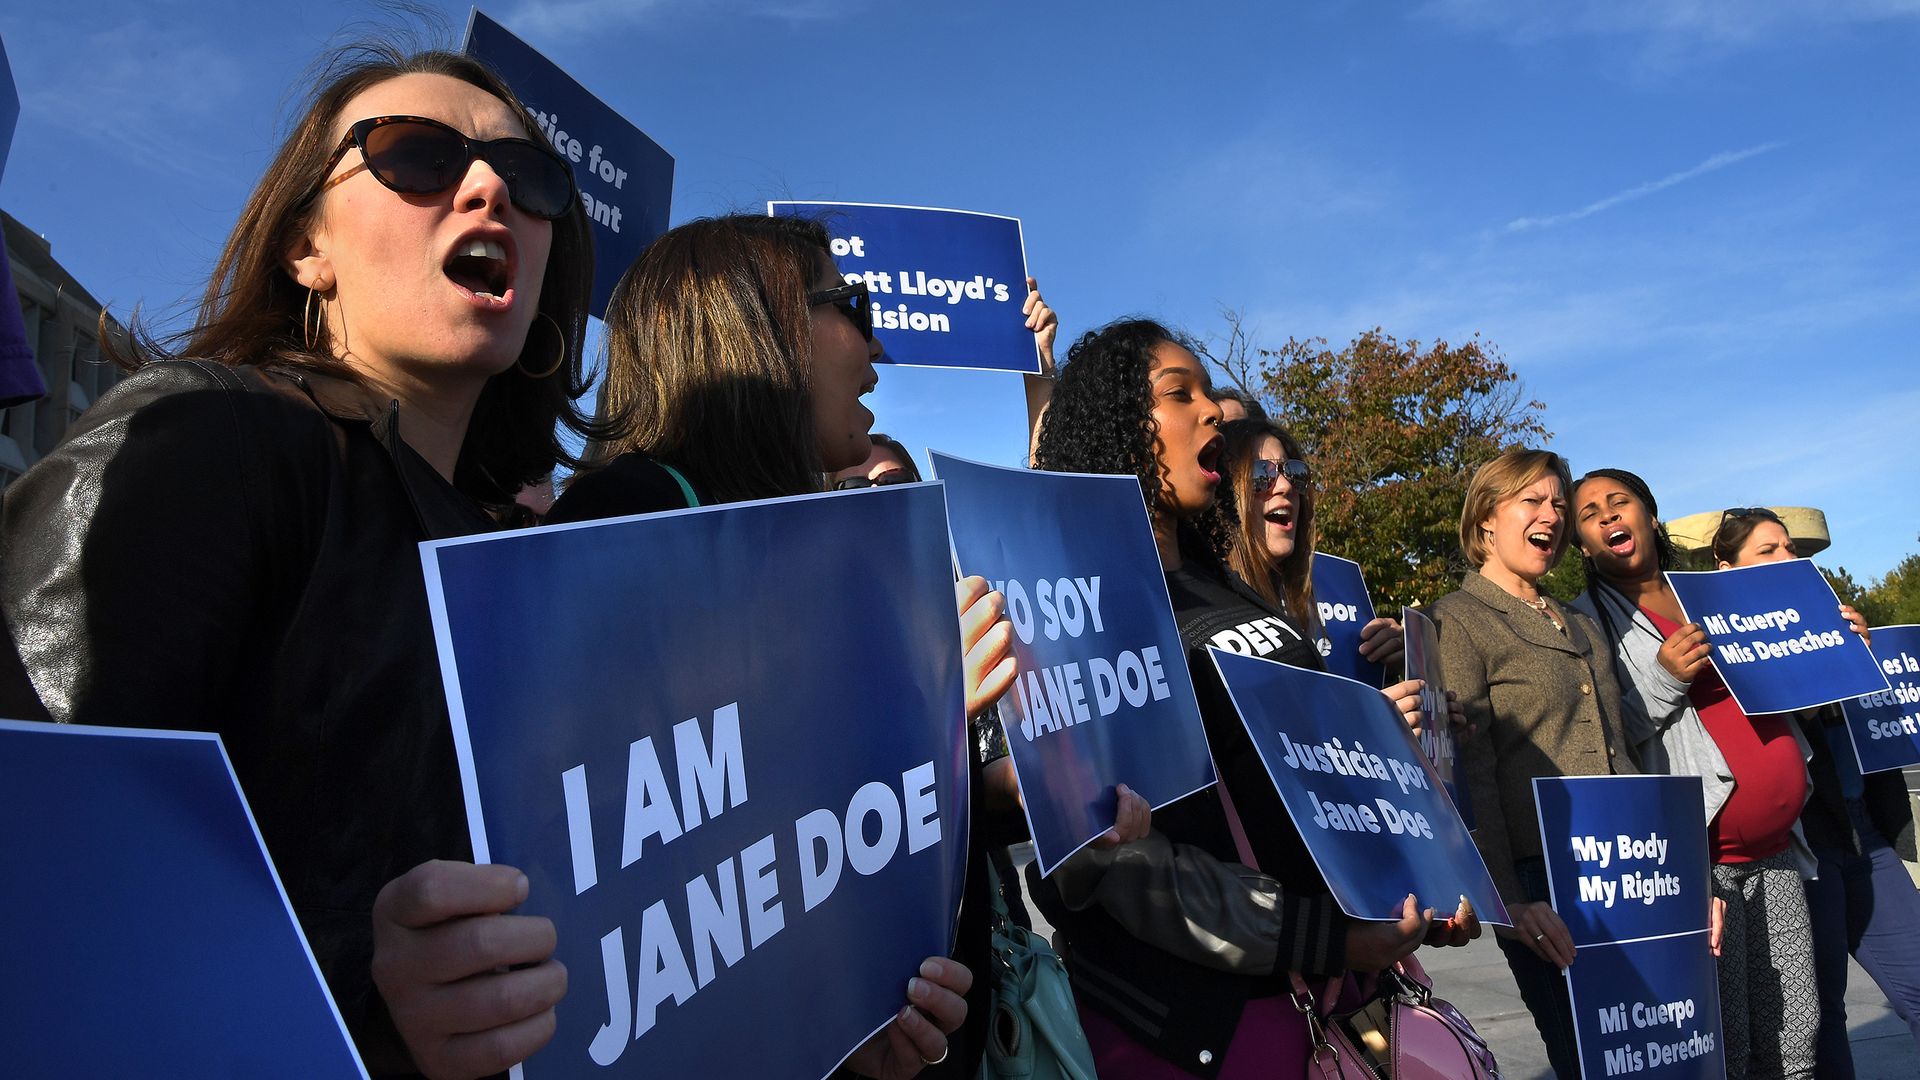 Women protesting with blue signs that say "I AM JANE DOE" 